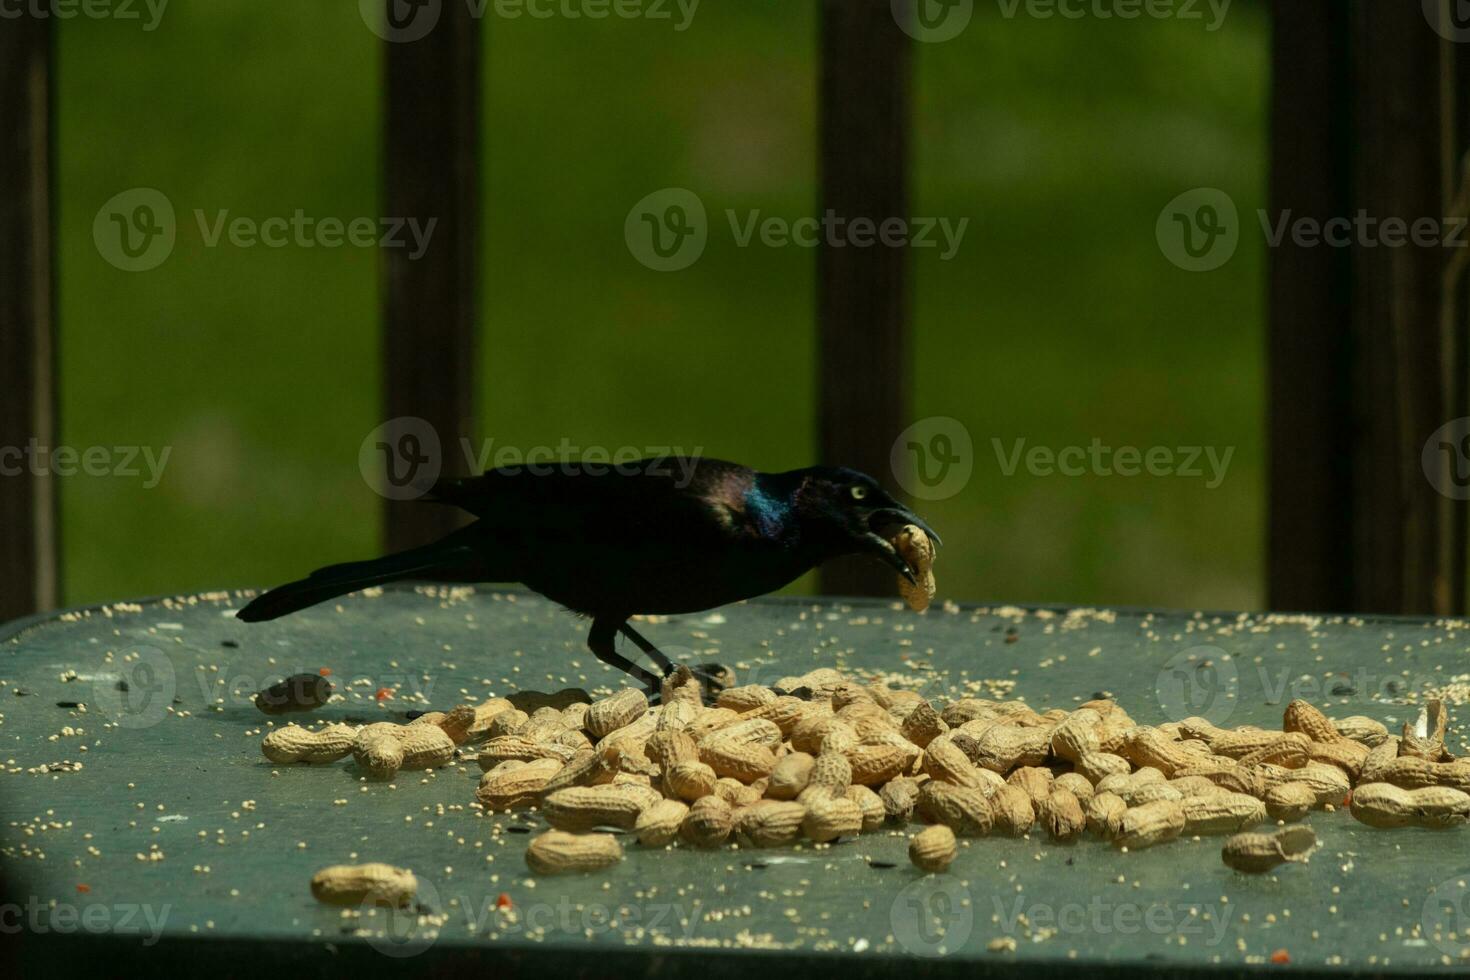 This pretty grackle bird came to the glass table for some peanuts. I love this bird's shiny feathers with blue and purple sometimes seen in the plumage. The menacing yellow eyes seem to glow. photo